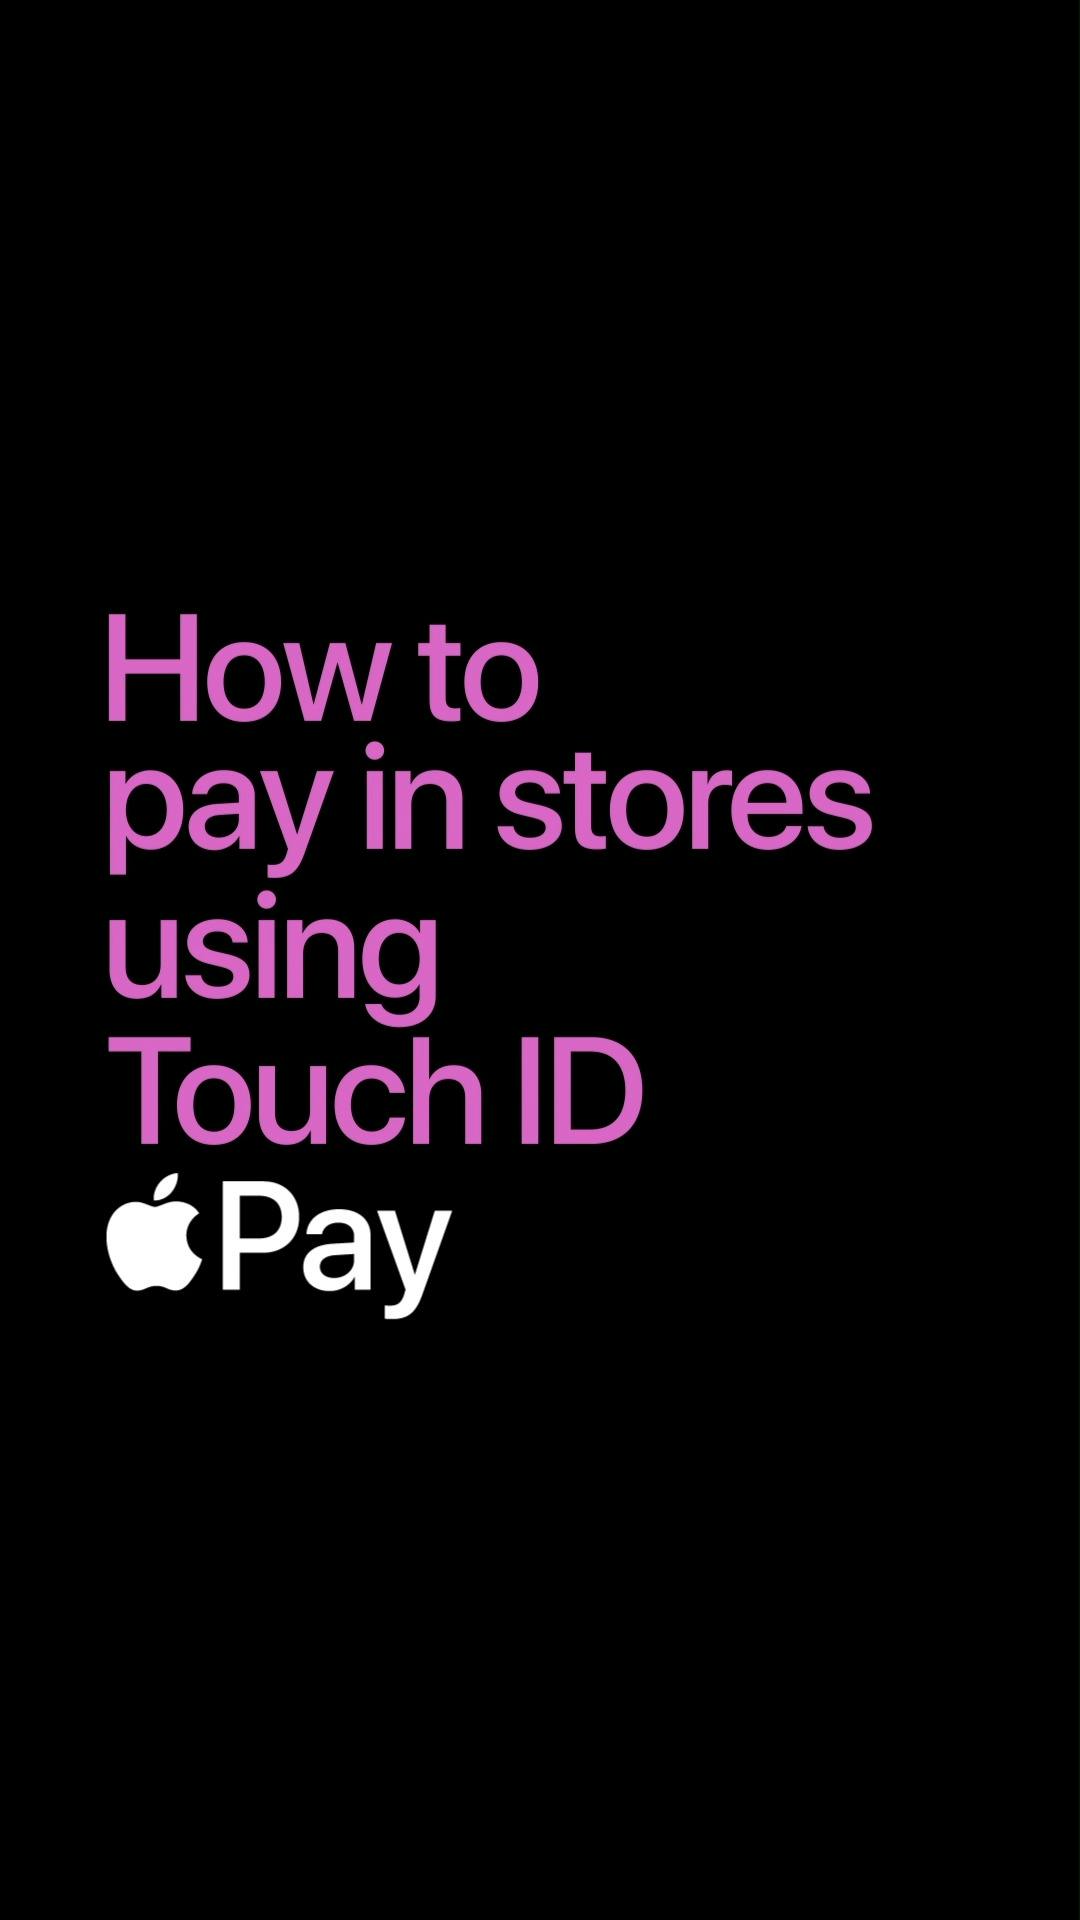 Add your card on Apple pay through Uphellas app and make payments everywhere with your iPhone device